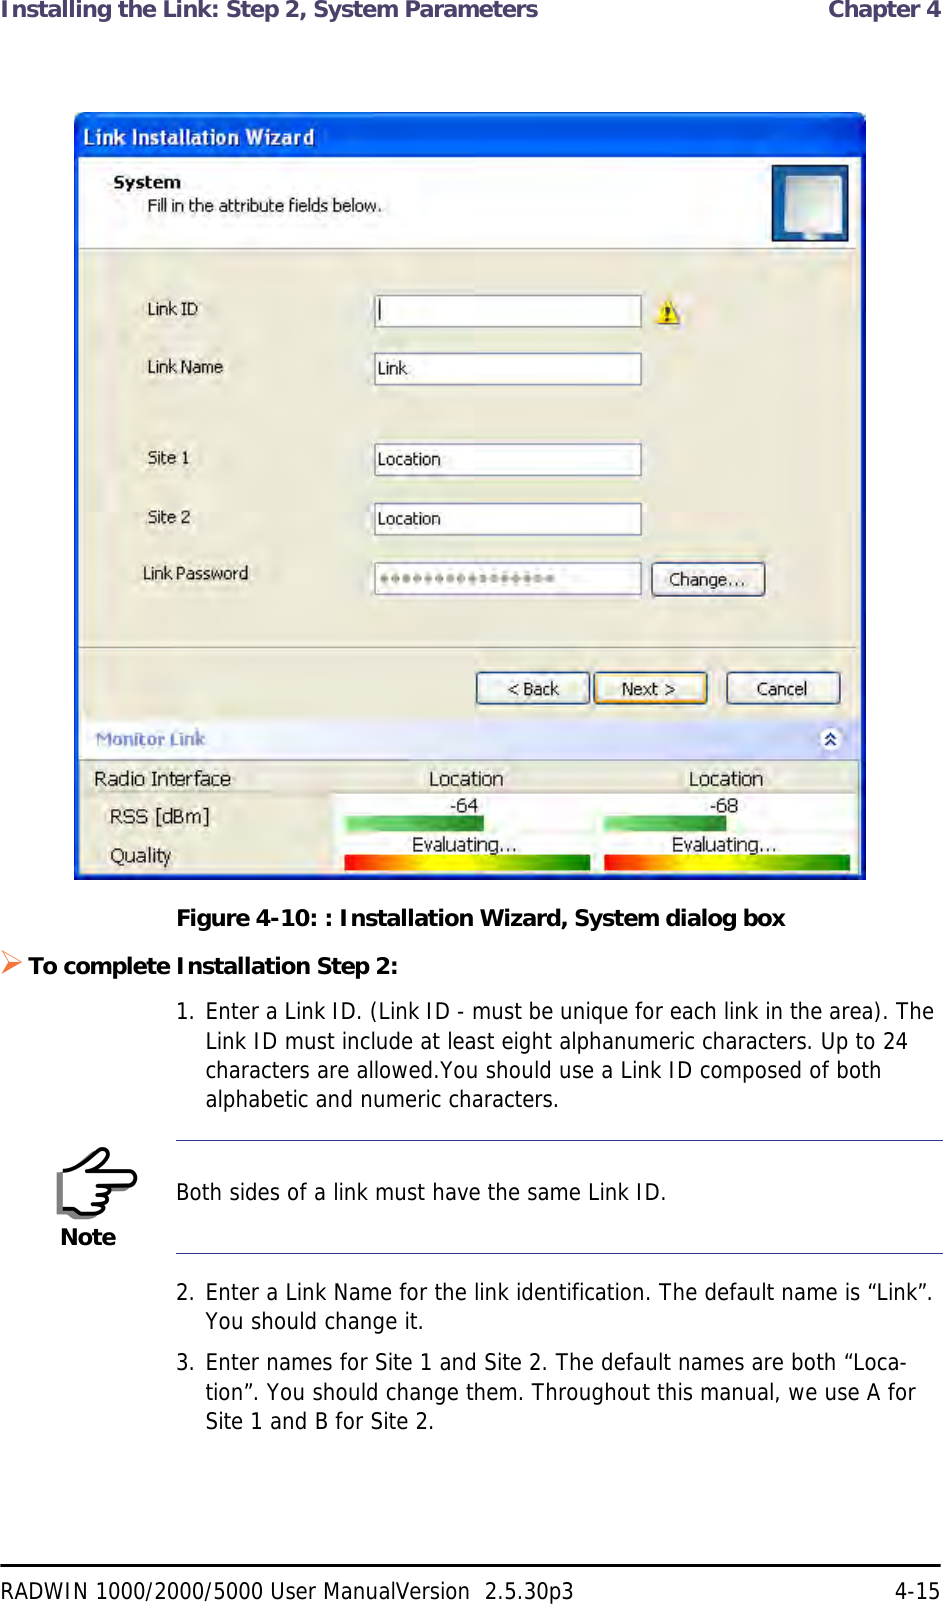 Installing the Link: Step 2, System Parameters  Chapter 4RADWIN 1000/2000/5000 User ManualVersion  2.5.30p3 4-15Figure 4-10: : Installation Wizard, System dialog boxTo complete Installation Step 2:1. Enter a Link ID. (Link ID - must be unique for each link in the area). The Link ID must include at least eight alphanumeric characters. Up to 24 characters are allowed.You should use a Link ID composed of both alphabetic and numeric characters.2. Enter a Link Name for the link identification. The default name is “Link”. You should change it.3. Enter names for Site 1 and Site 2. The default names are both “Loca-tion”. You should change them. Throughout this manual, we use A for Site 1 and B for Site 2.NoteBoth sides of a link must have the same Link ID.